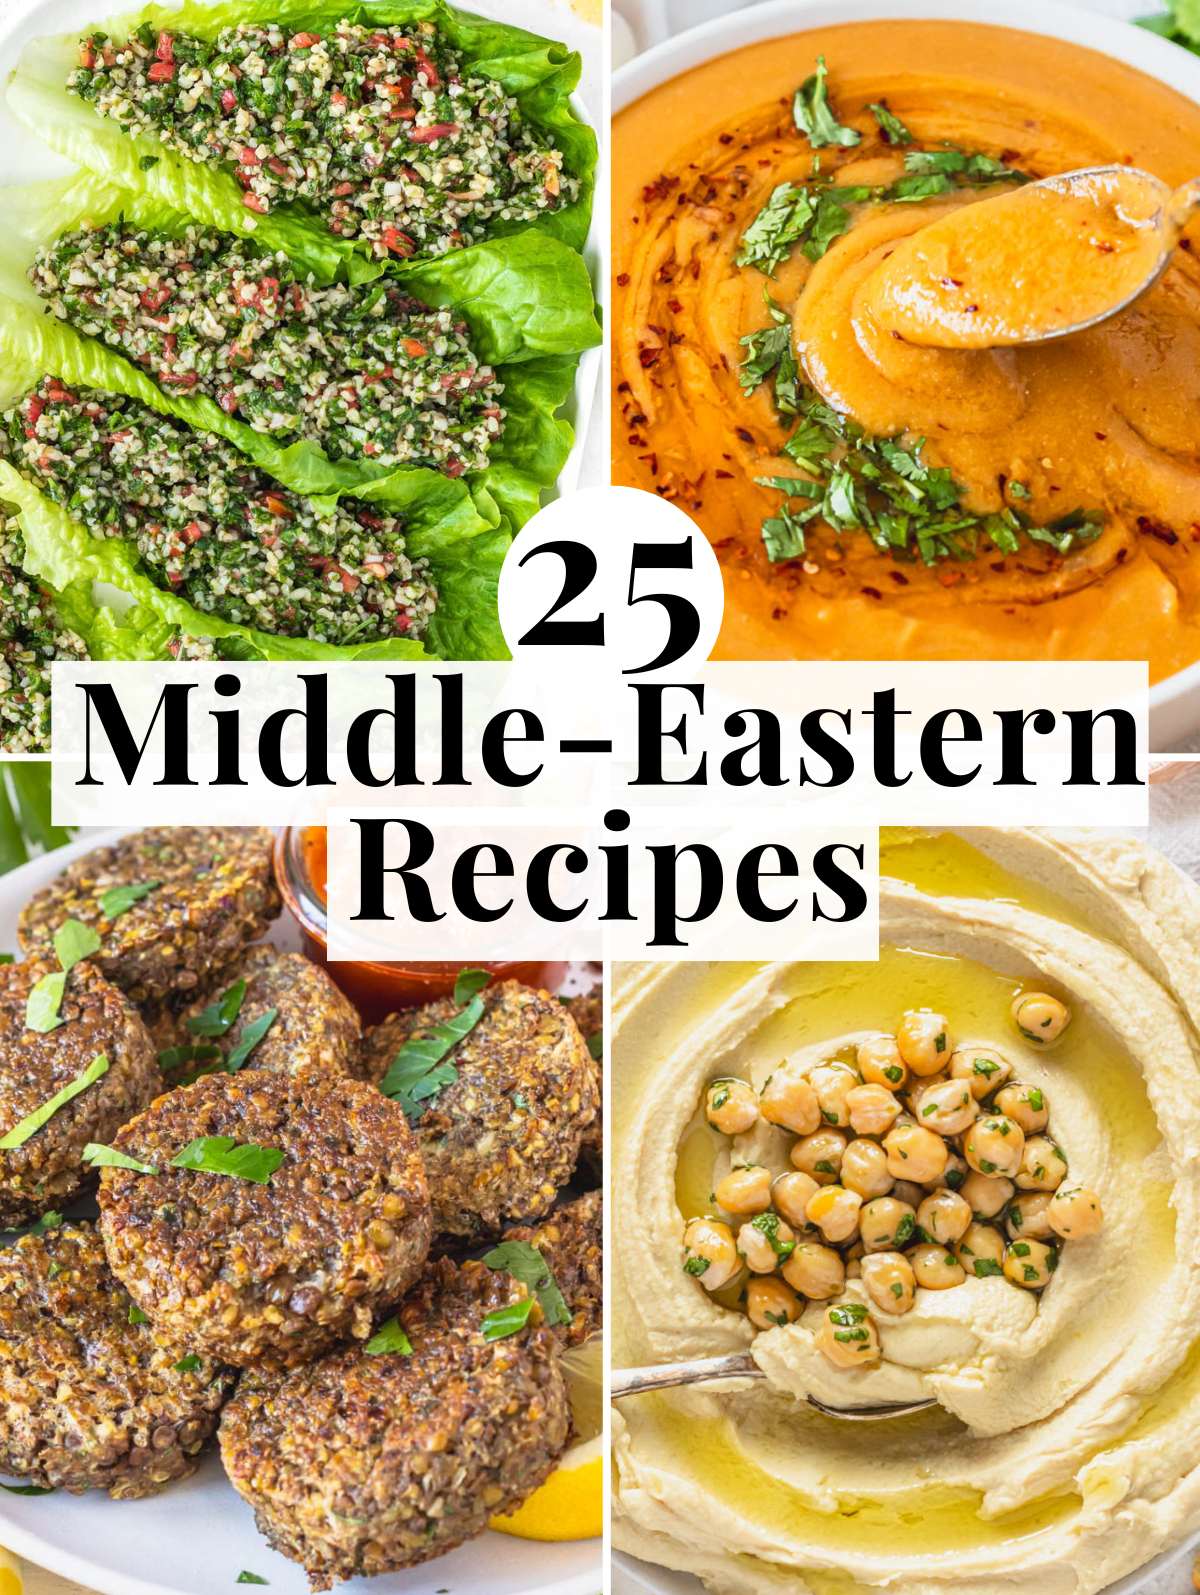 Middle Eastern Recipes with spreads, soups, and mains